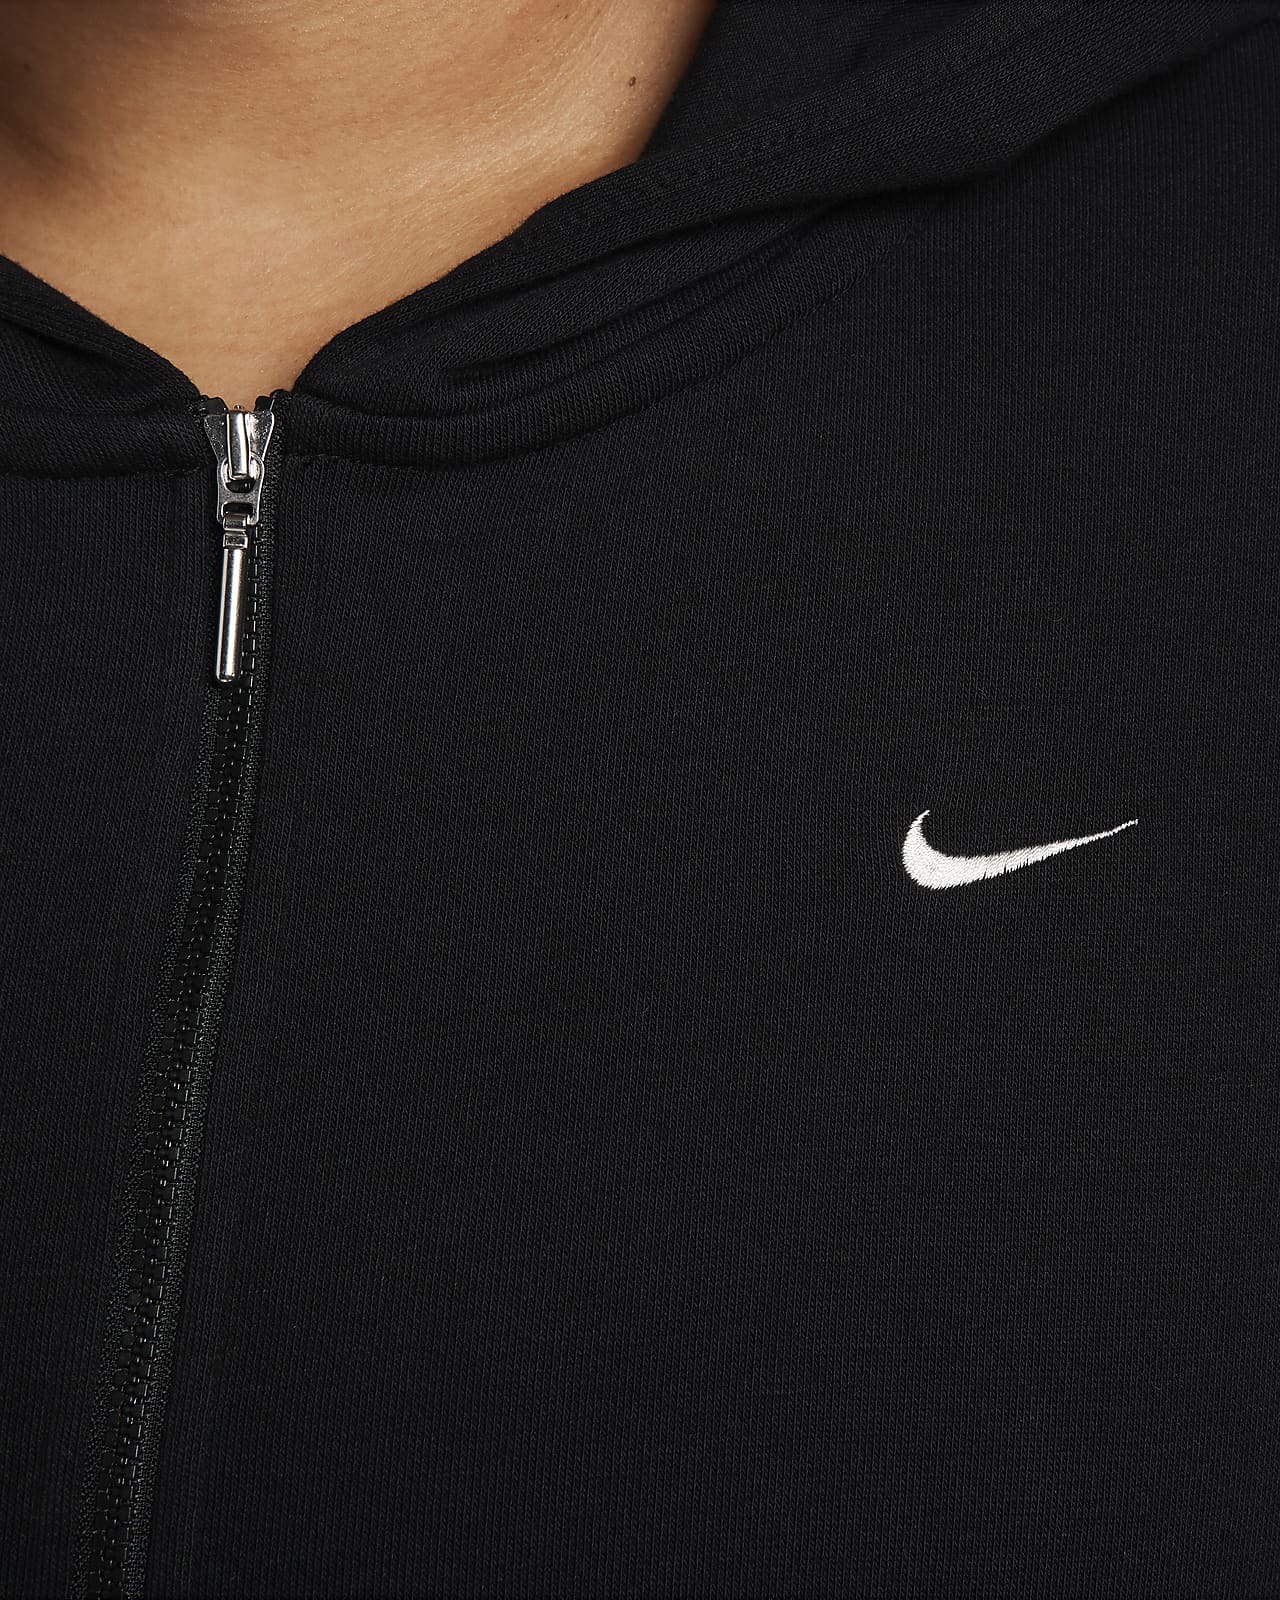 Nike Sportswear Chill Terry Women's Loose Full-Zip French Terry Hoodie  (Plus Size)